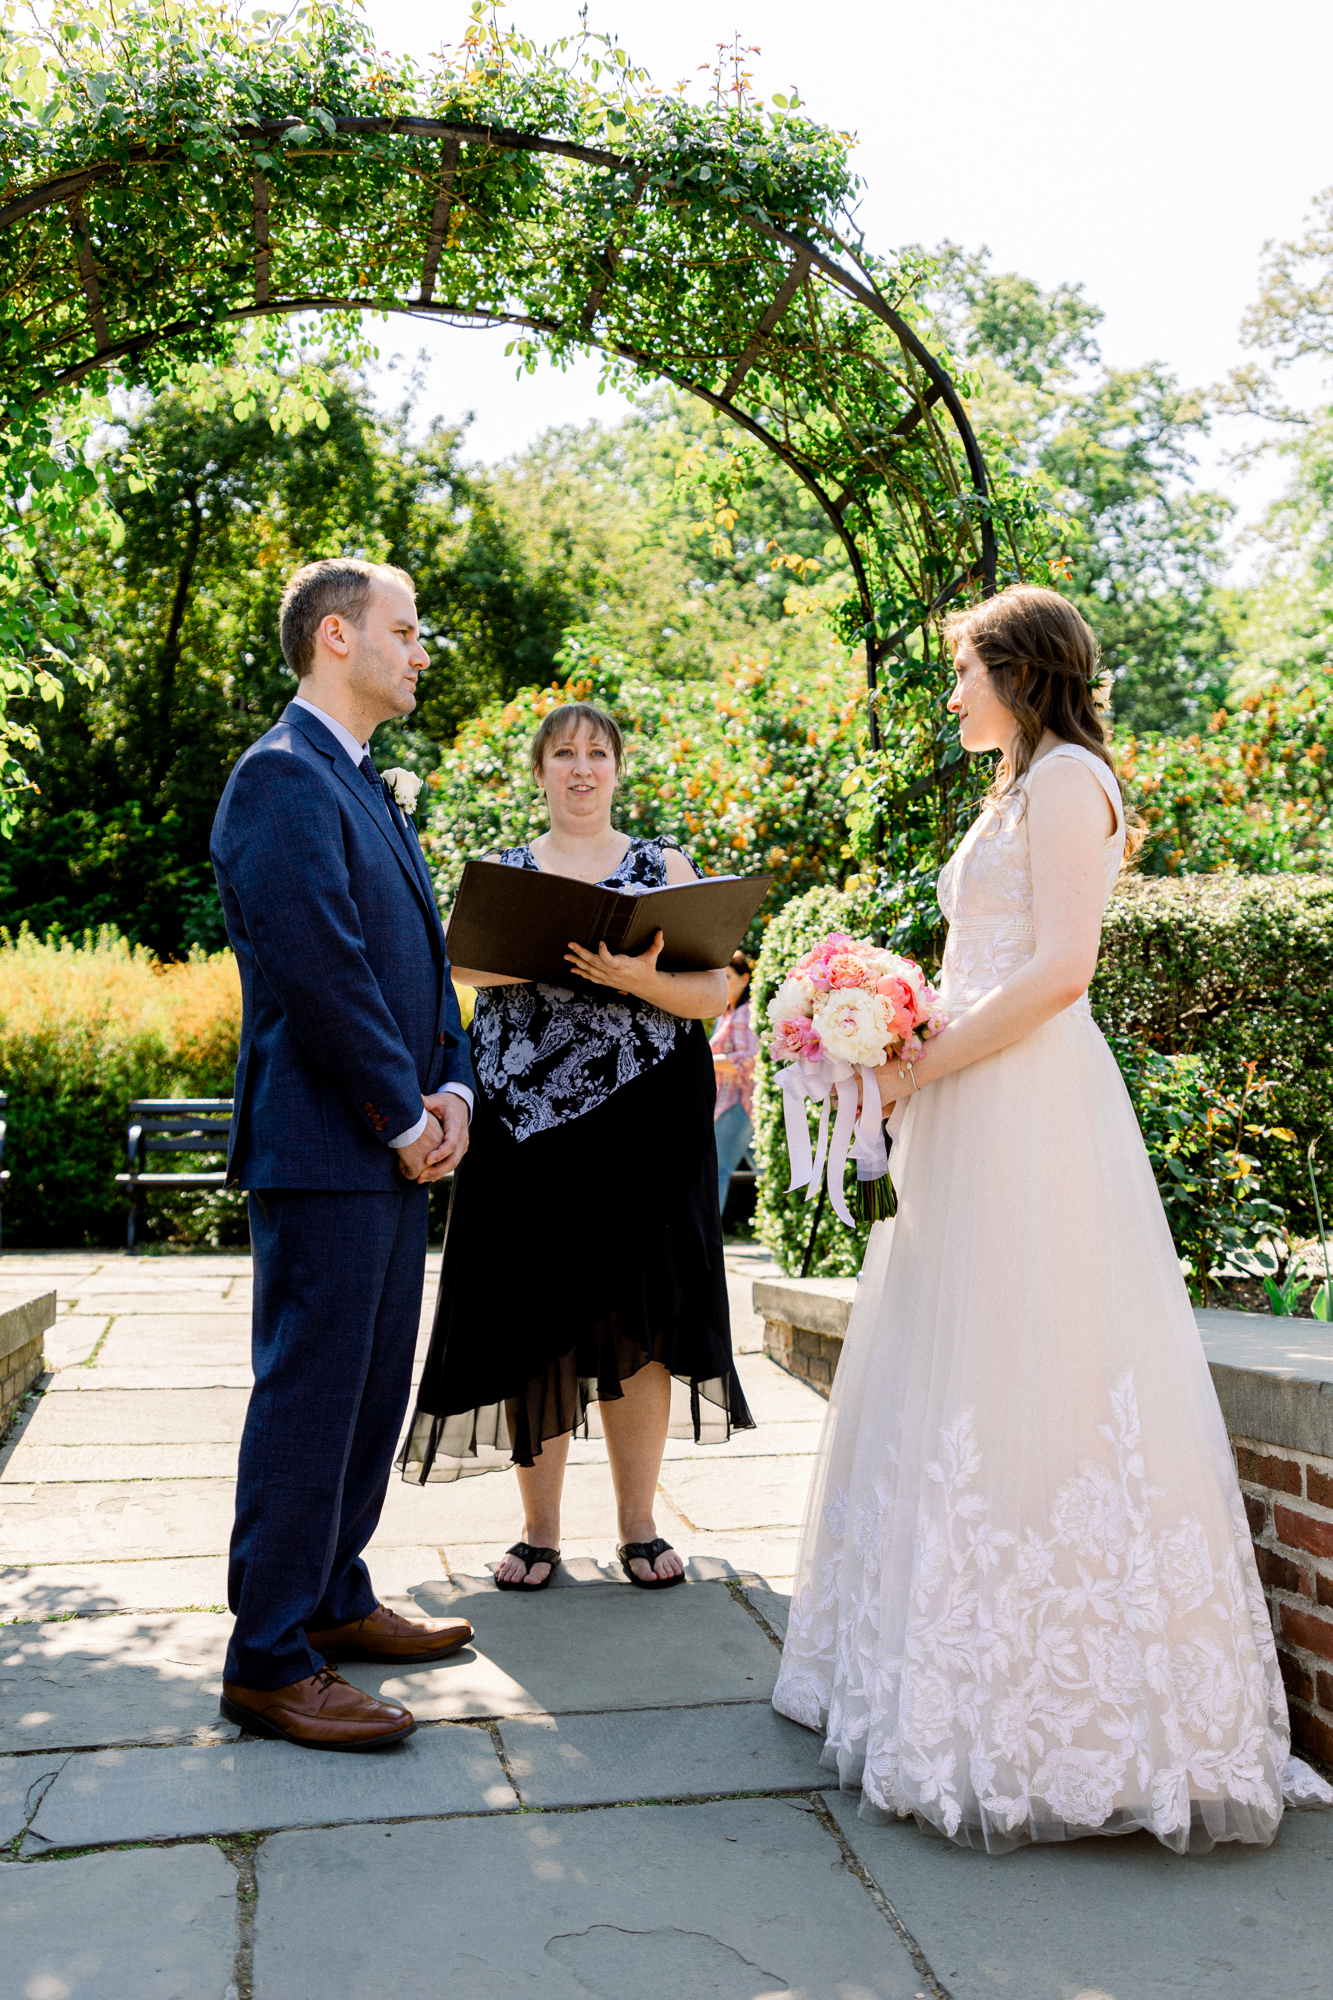 Classic Summer Wedding Photos at the Conservatory Garden in Central Park New York